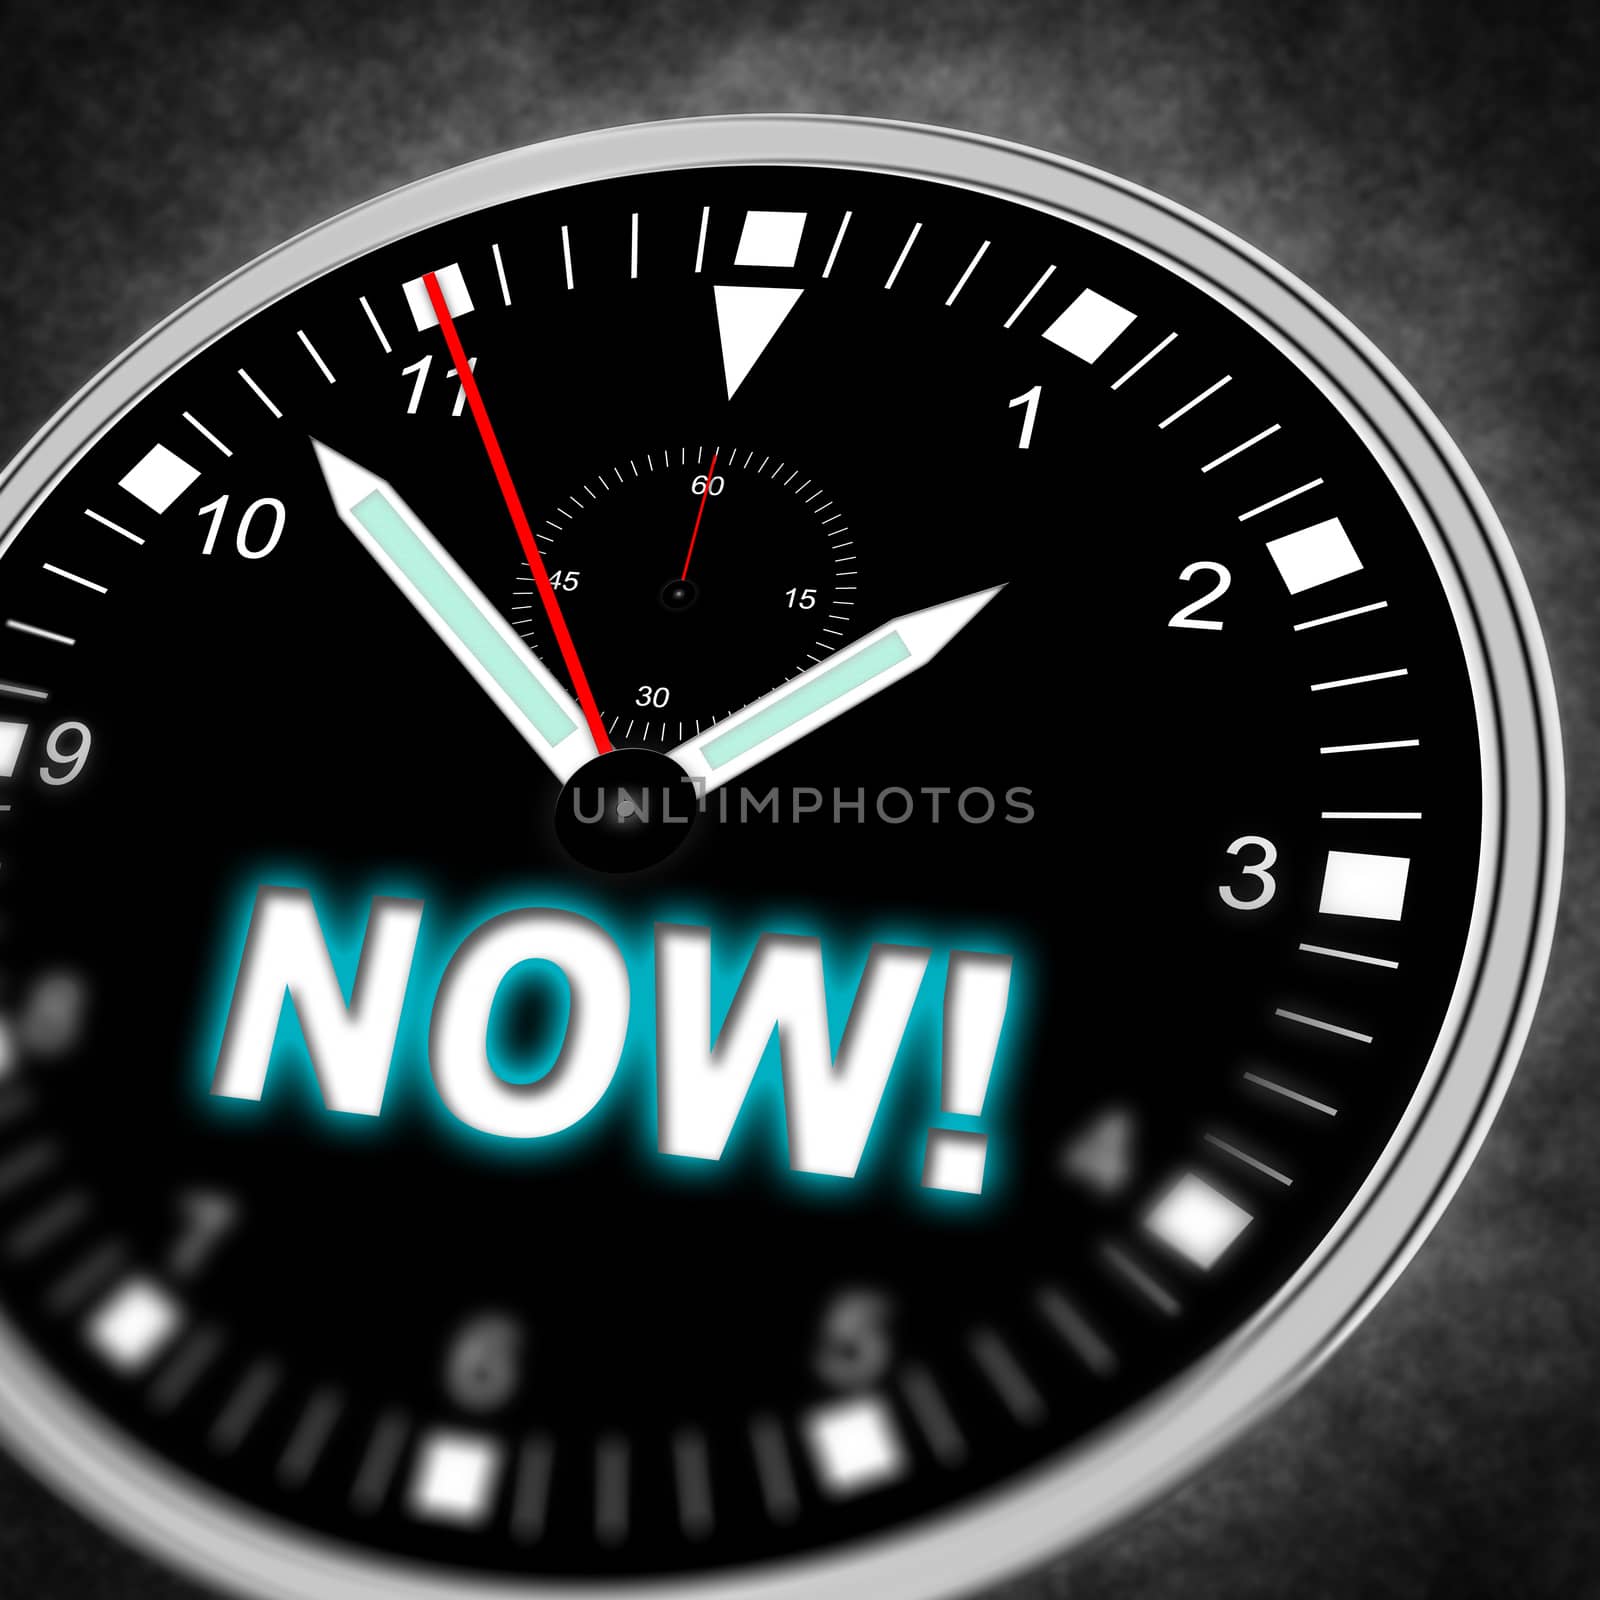 Illustration of a watch with text "NOW!"